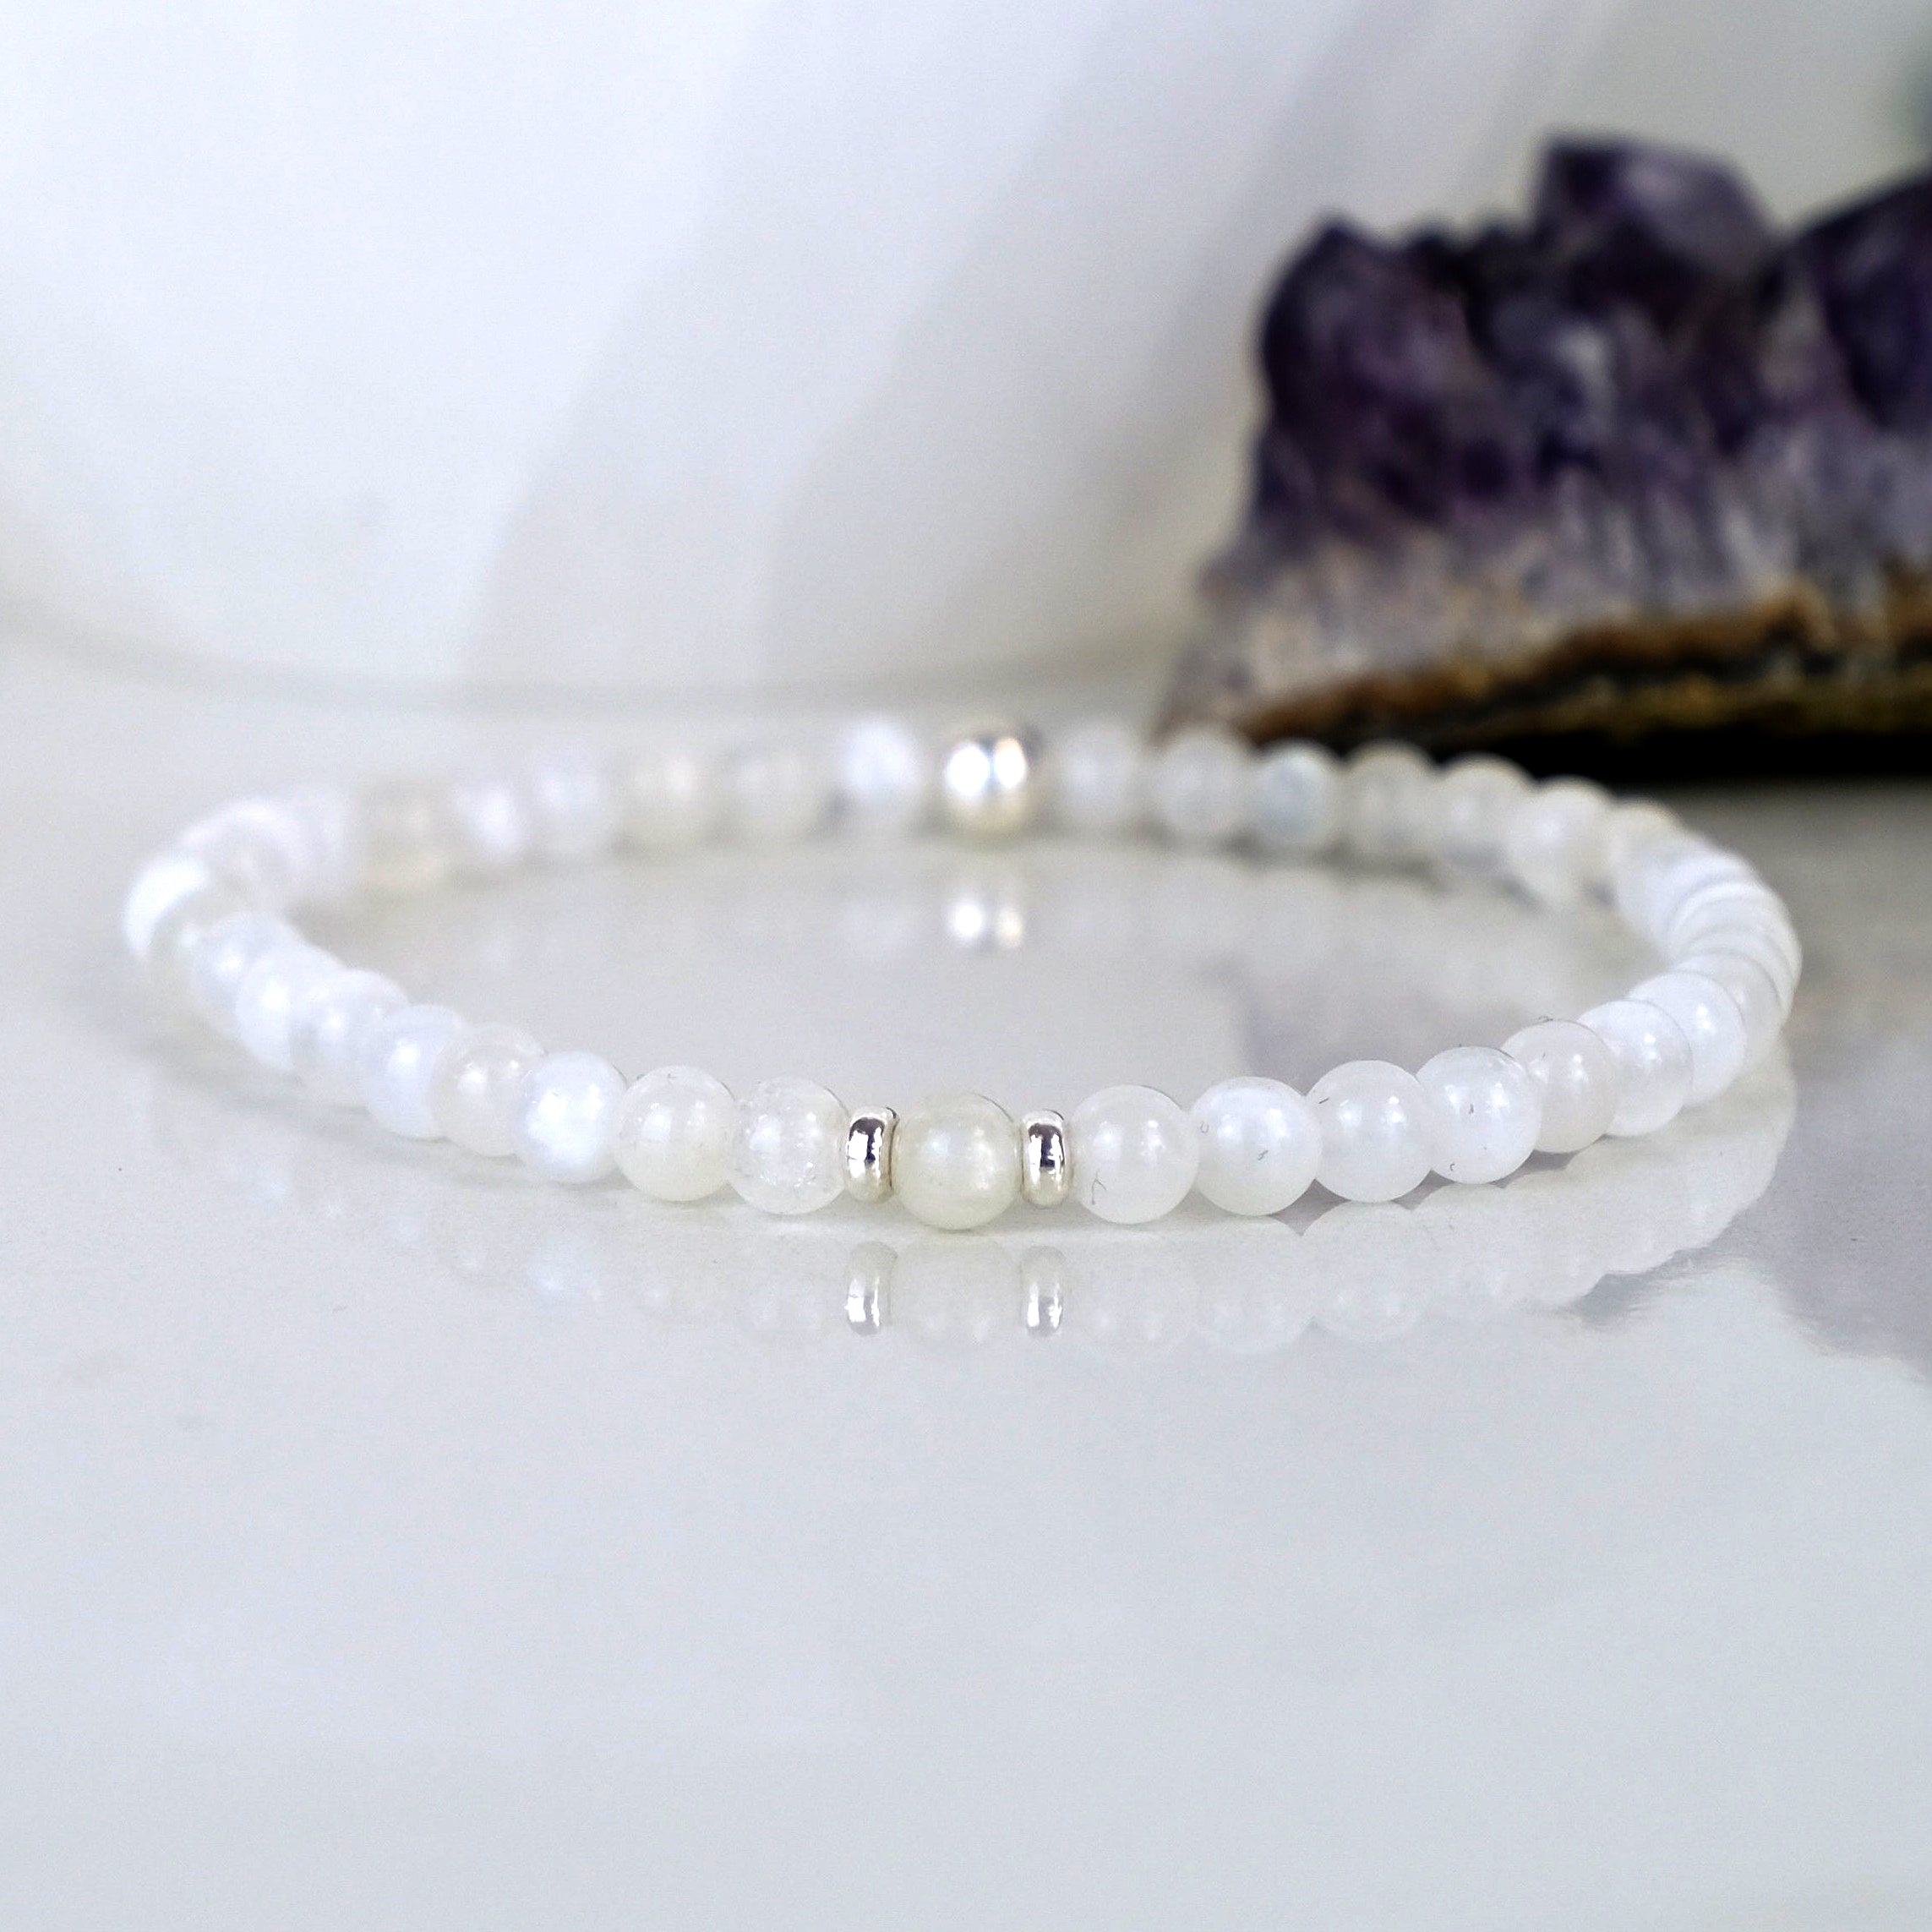 A moonstone gemstone bracelet in 4mm beads with silver accessories